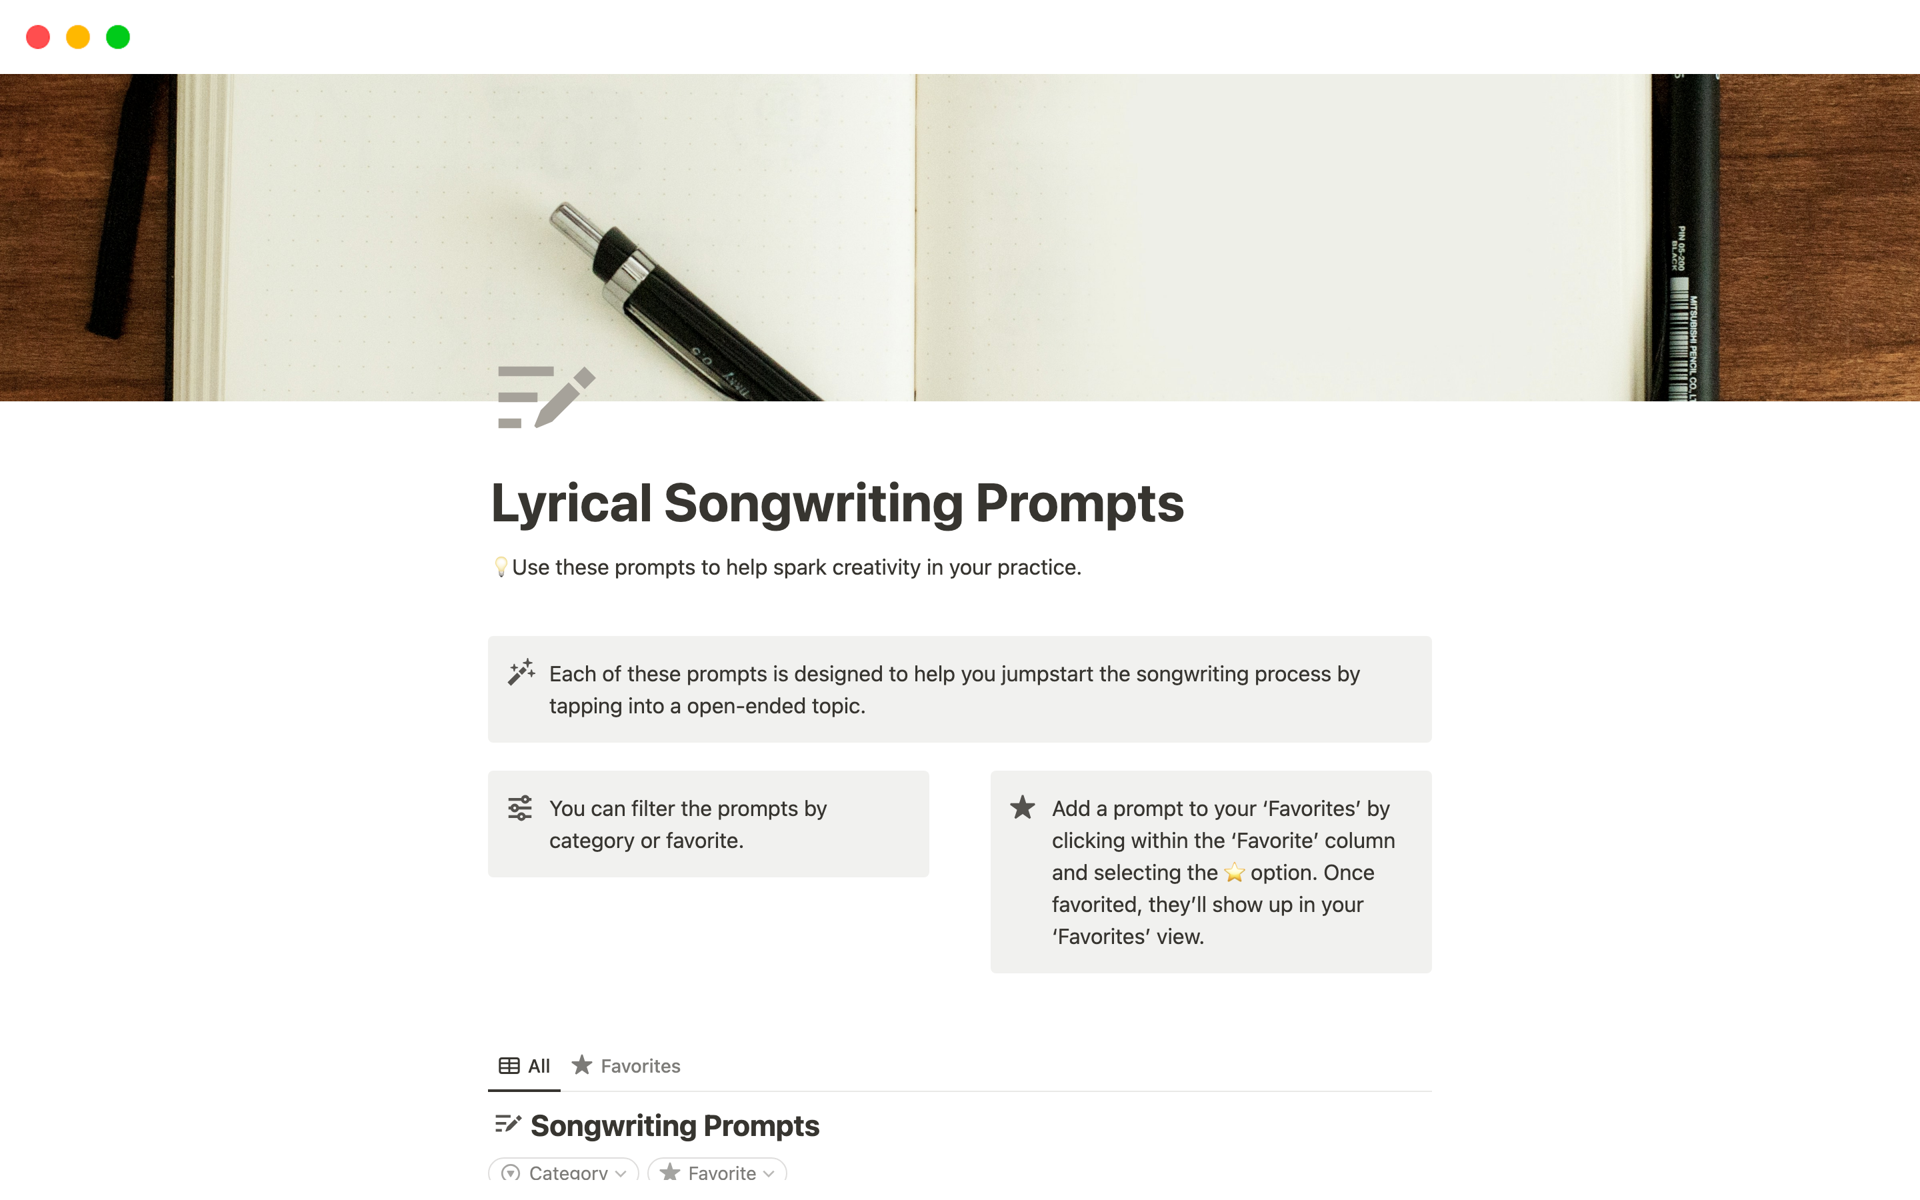 Struggling with writer's block? Give your songwriting a jolt of inspiration with our curated collection of lyrical prompts within Notion. Tap into new ideas, explore fresh perspectives, and break free from stale patterns. Perfect for songwriters of all levels.